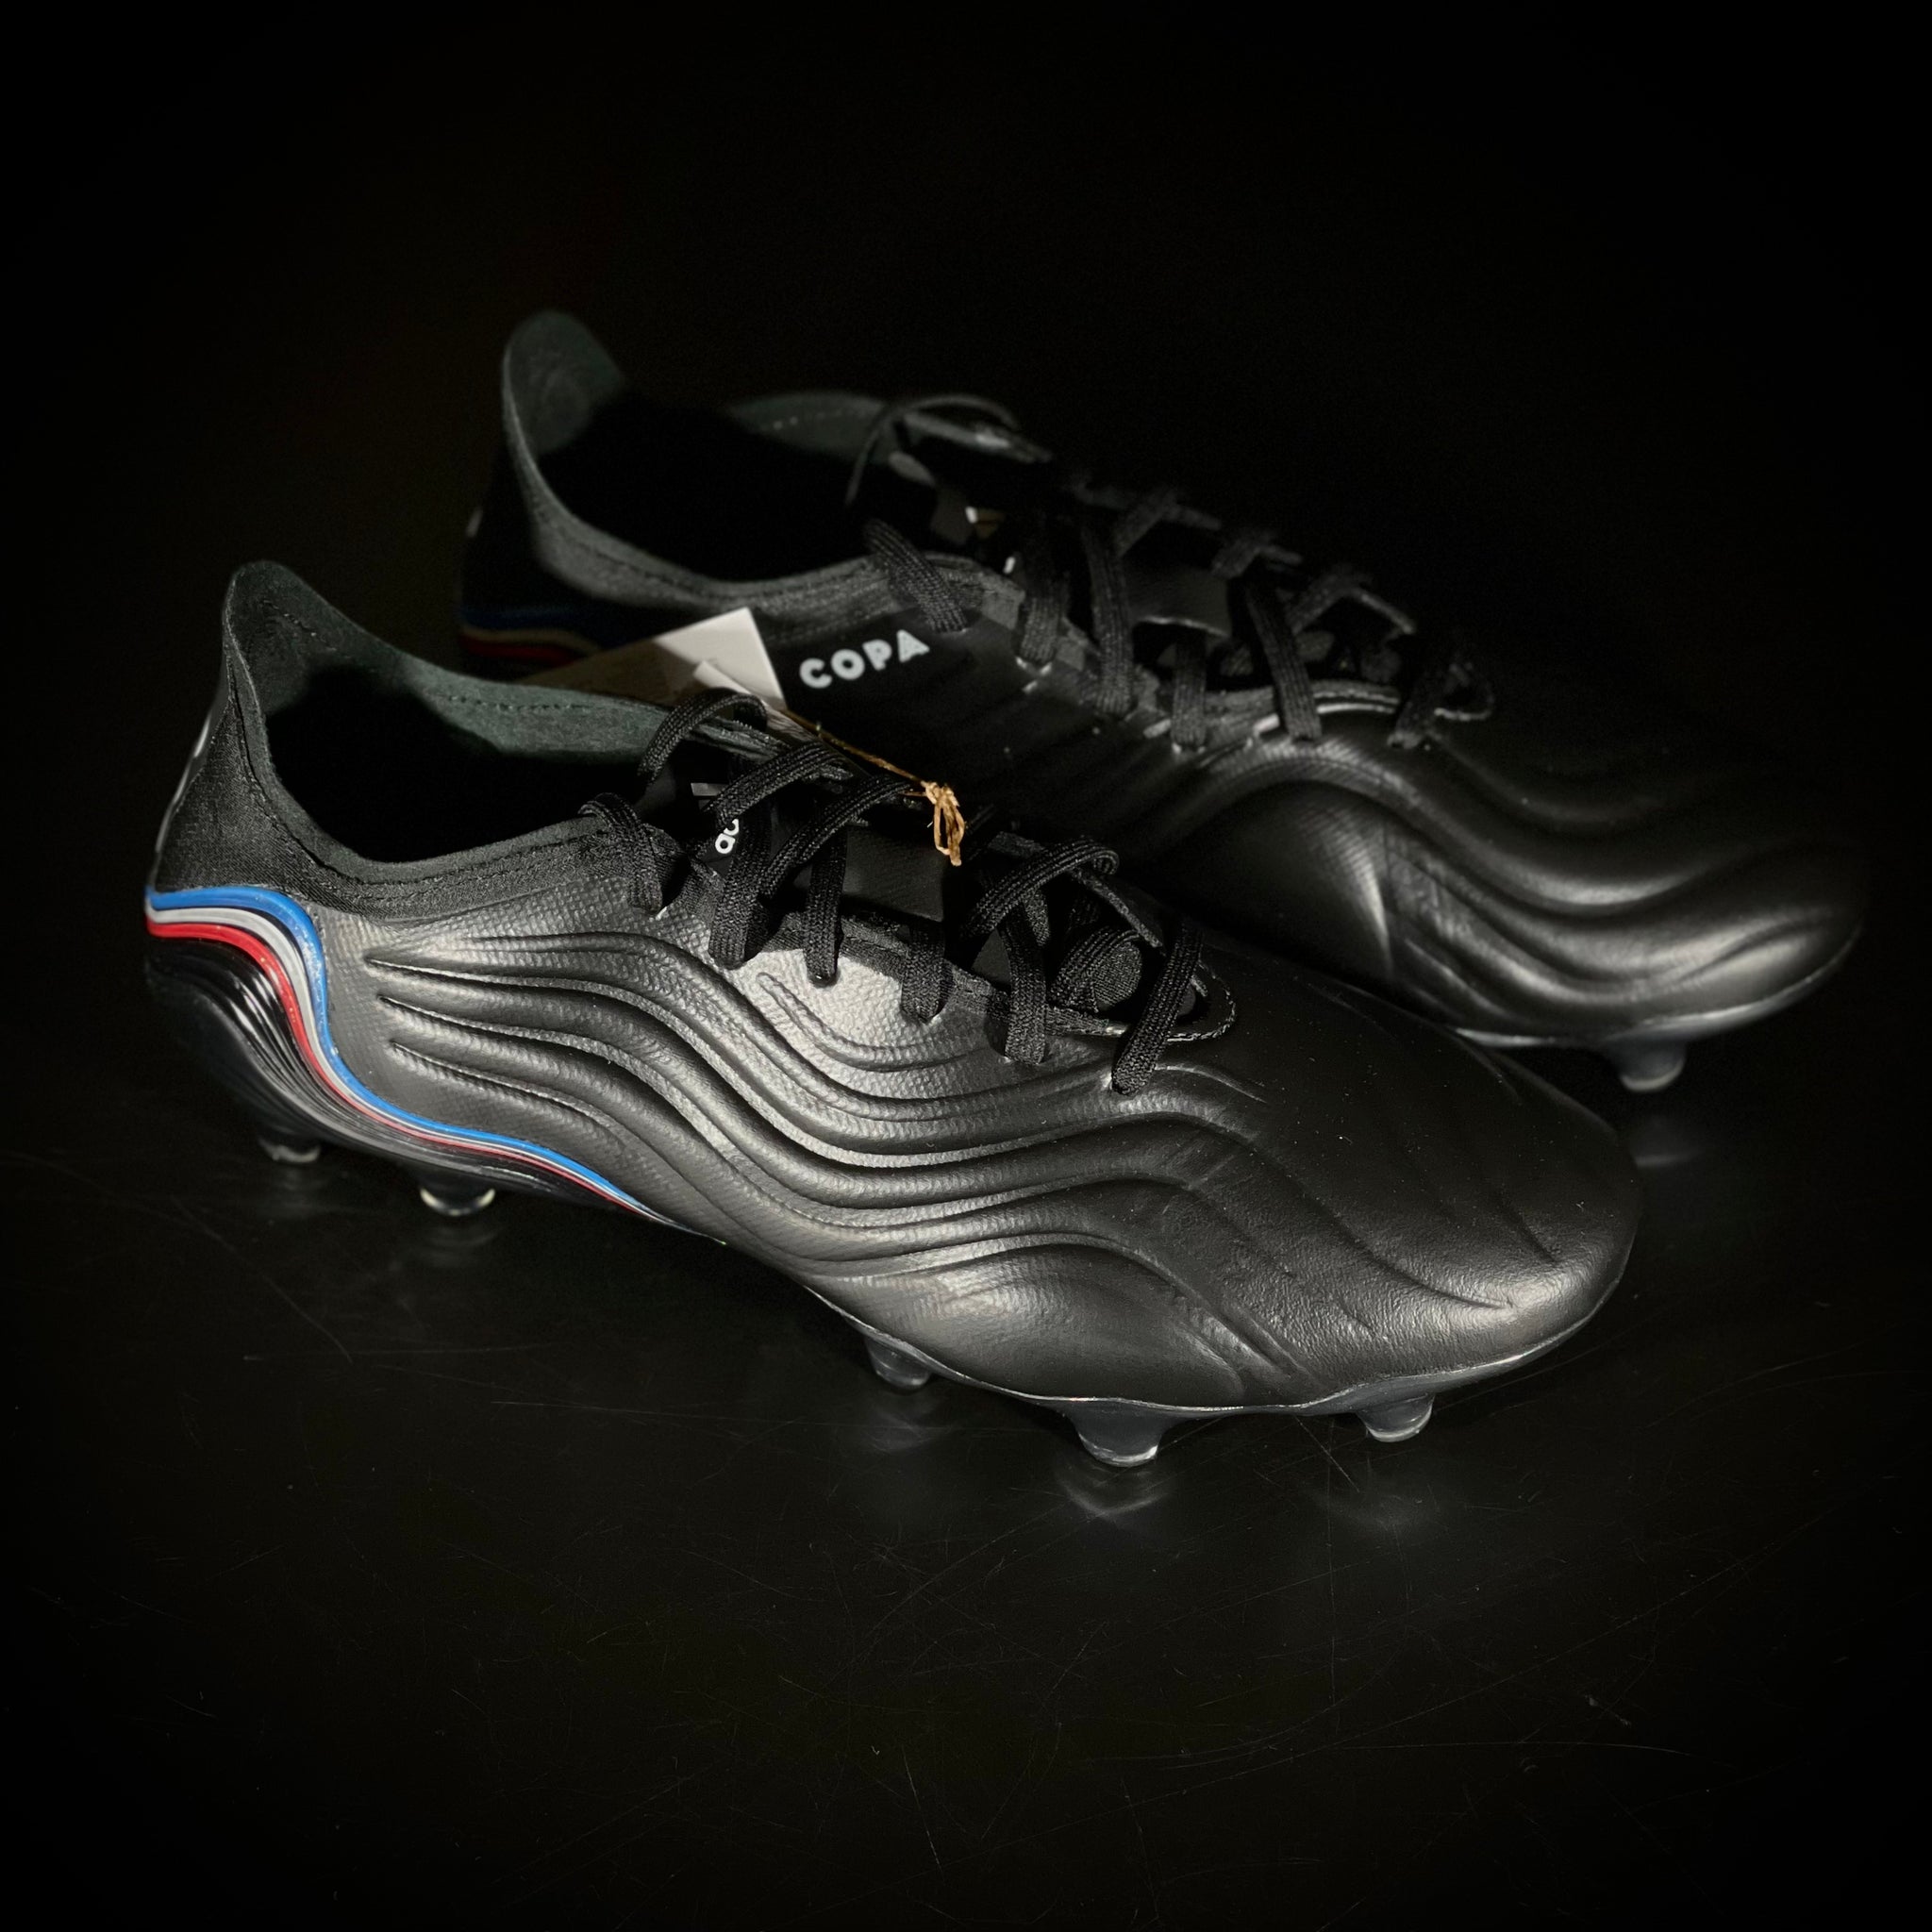 adidas Copa Sense.1 FG - Edge Of Darkness – The Boot Doctor